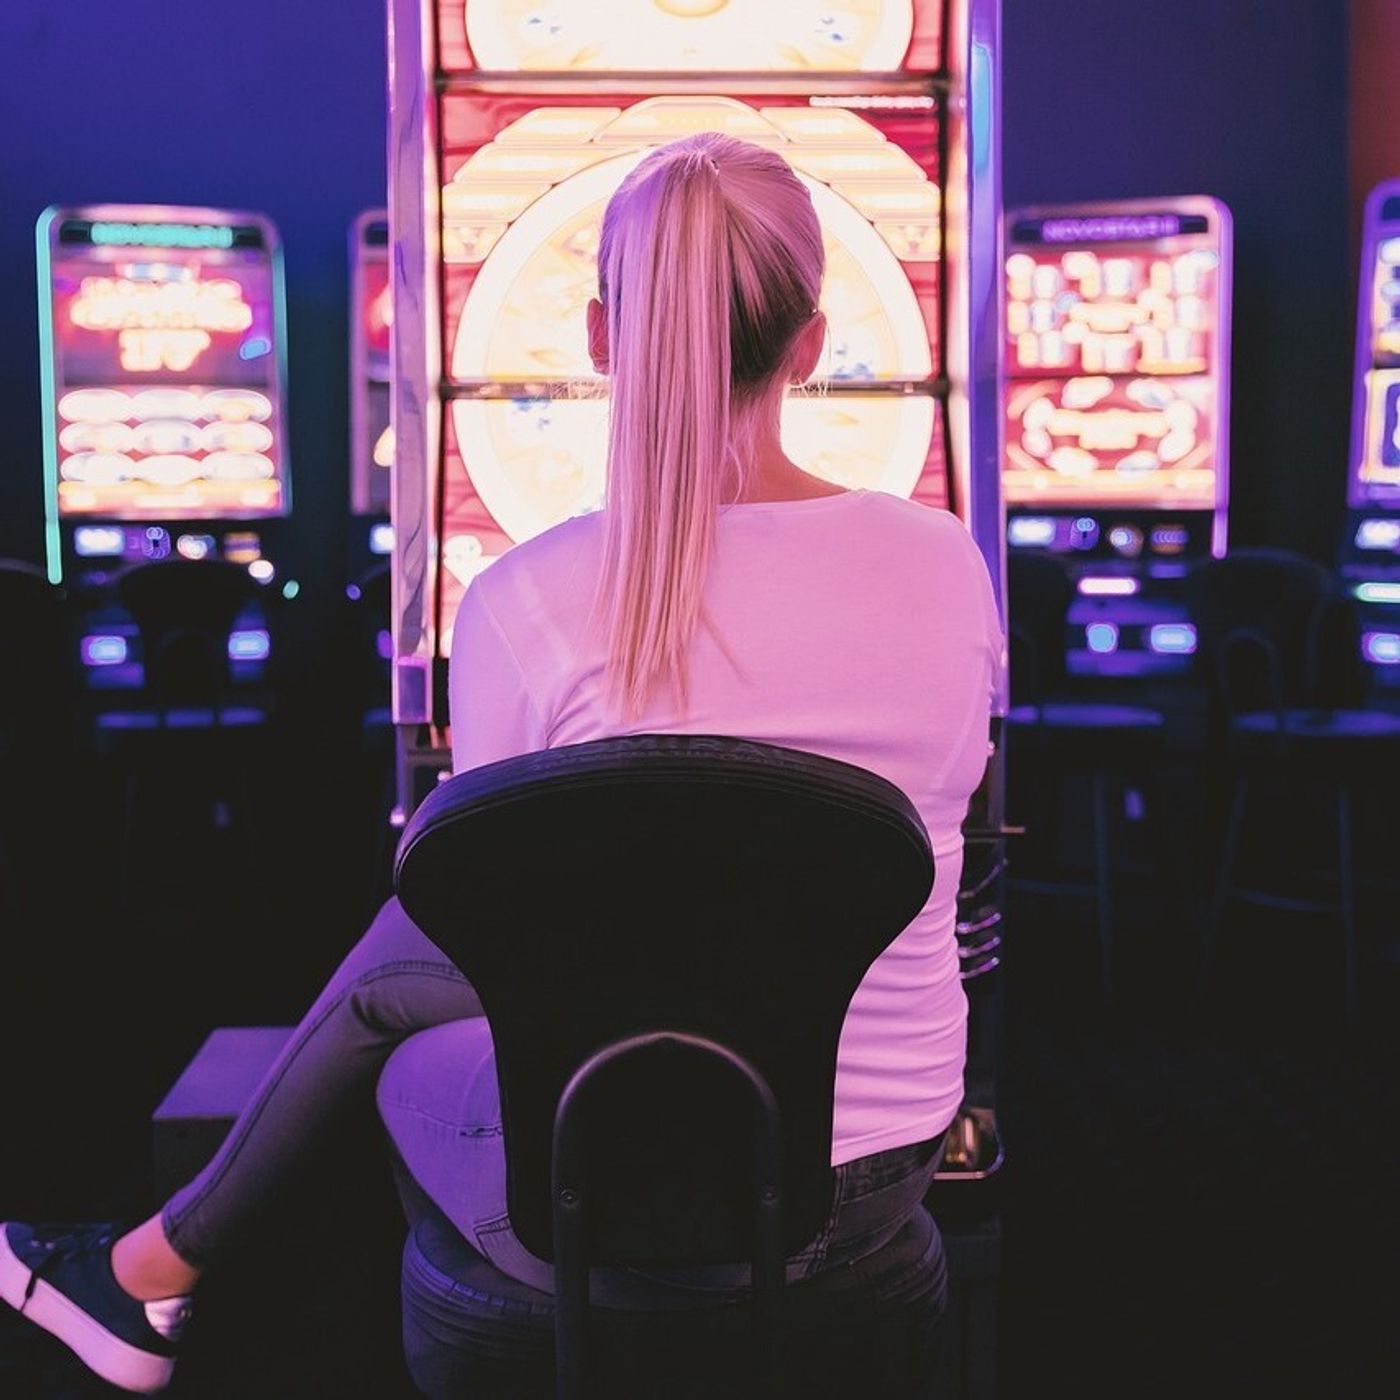 Ep 309: A rise in female gambling - with Elissa, Dr Ellie Cannon and GambleAware